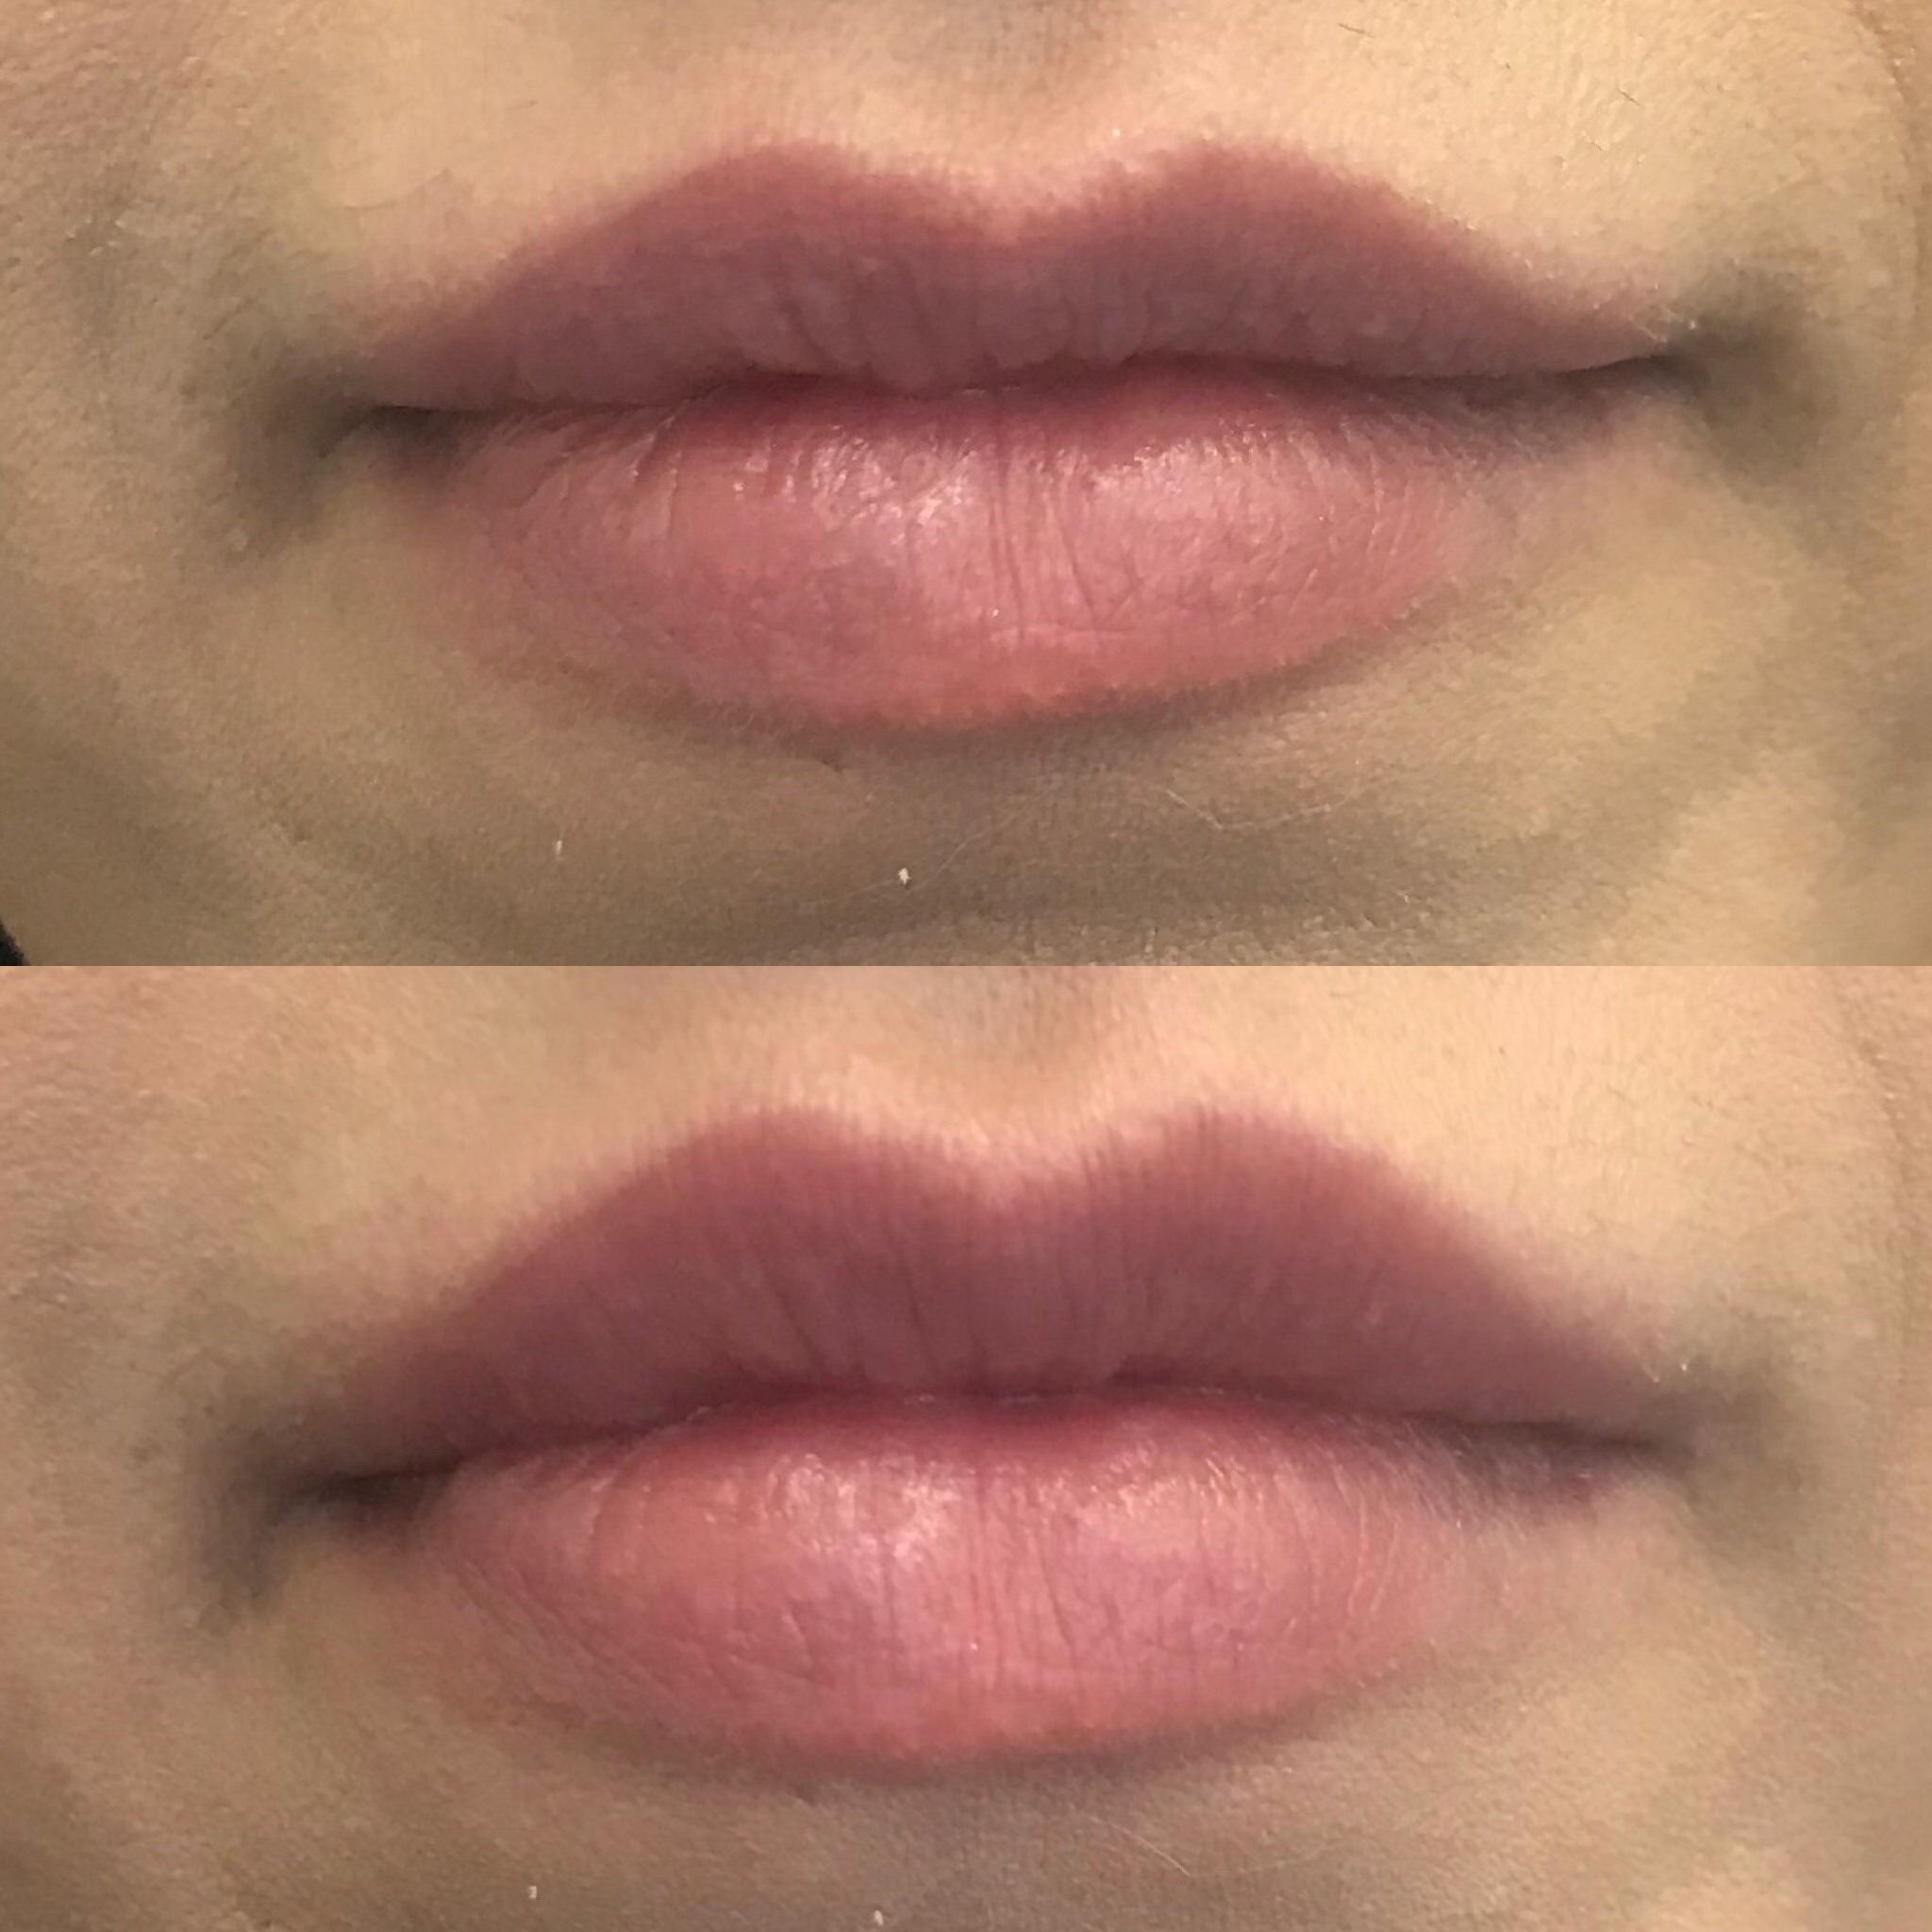 Before and After Results of Lip filler to improve lip fullness.